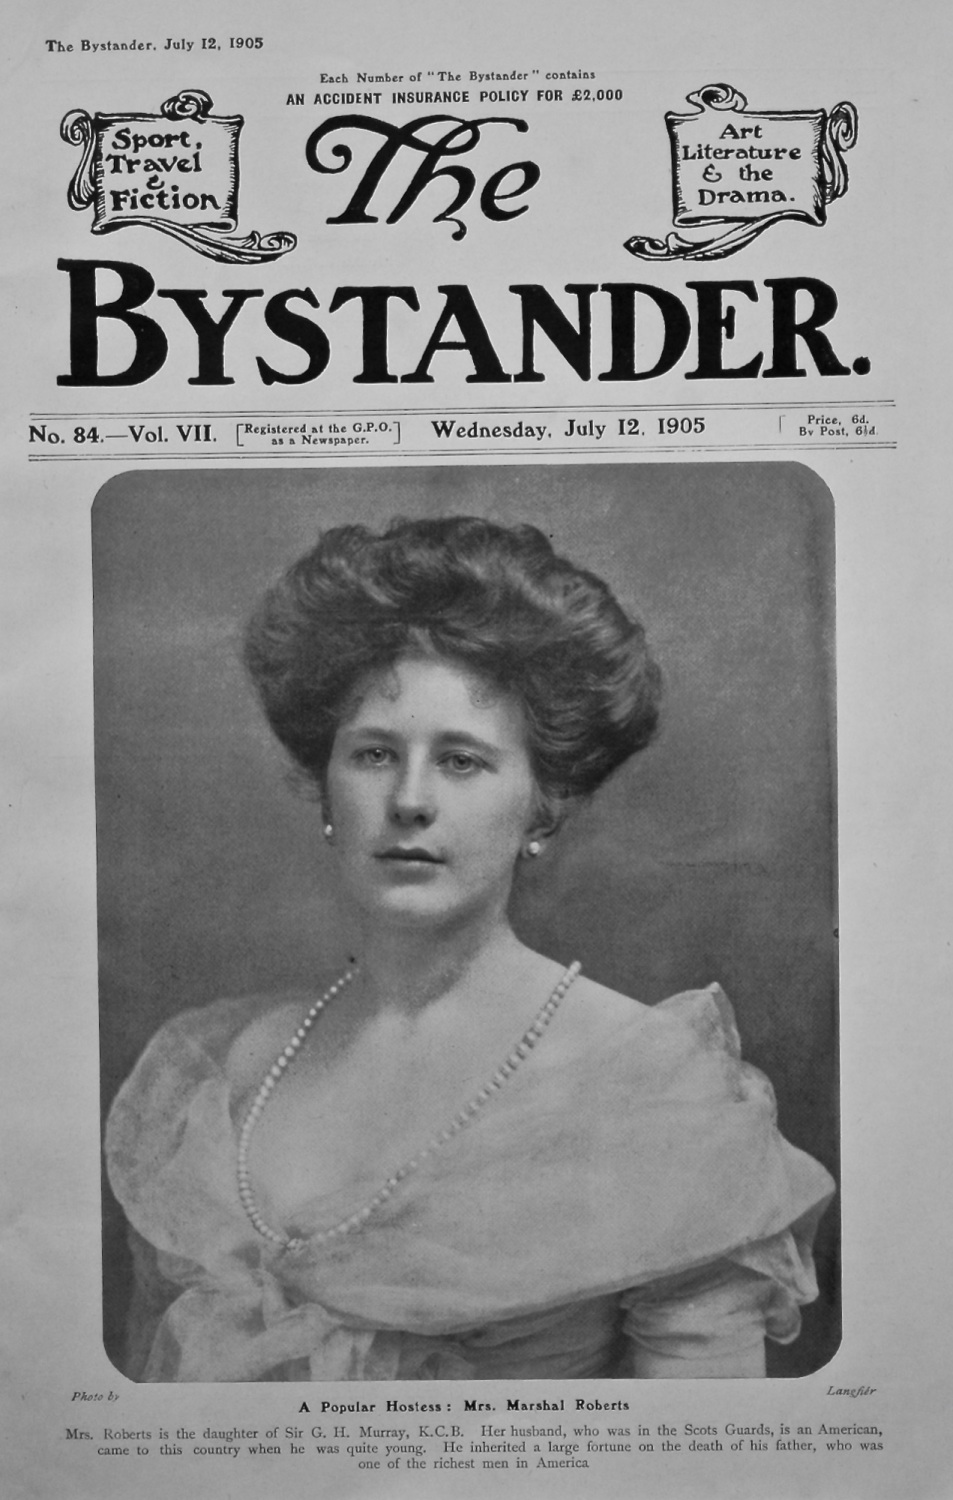 The Bystander, July 12th, 1905, (Front Page)    A Popular Host : Mrs. Marsh